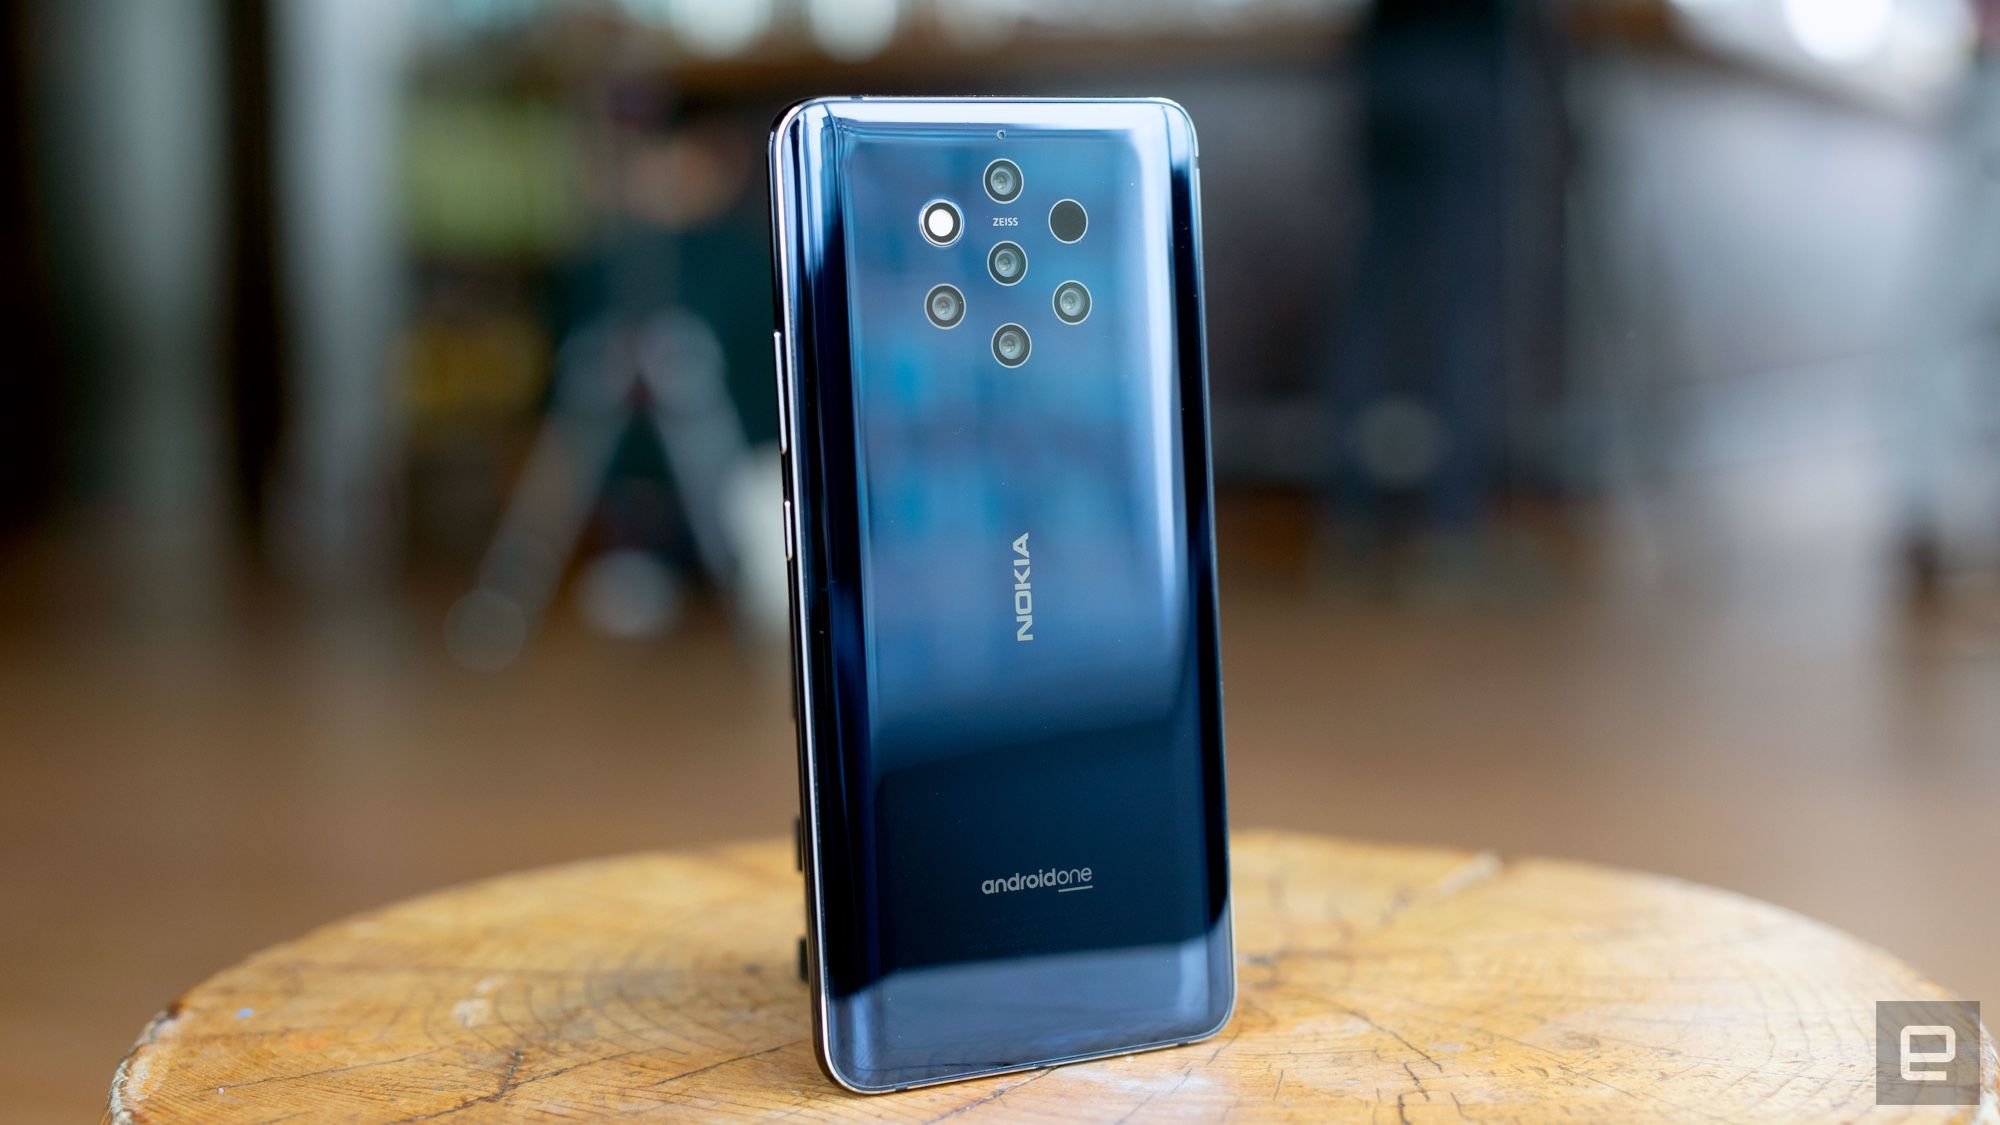 The Nokia 9 PureView launched a the MWC in Barcelona comes with 5 rear camera setup | Photo by : Engadget.